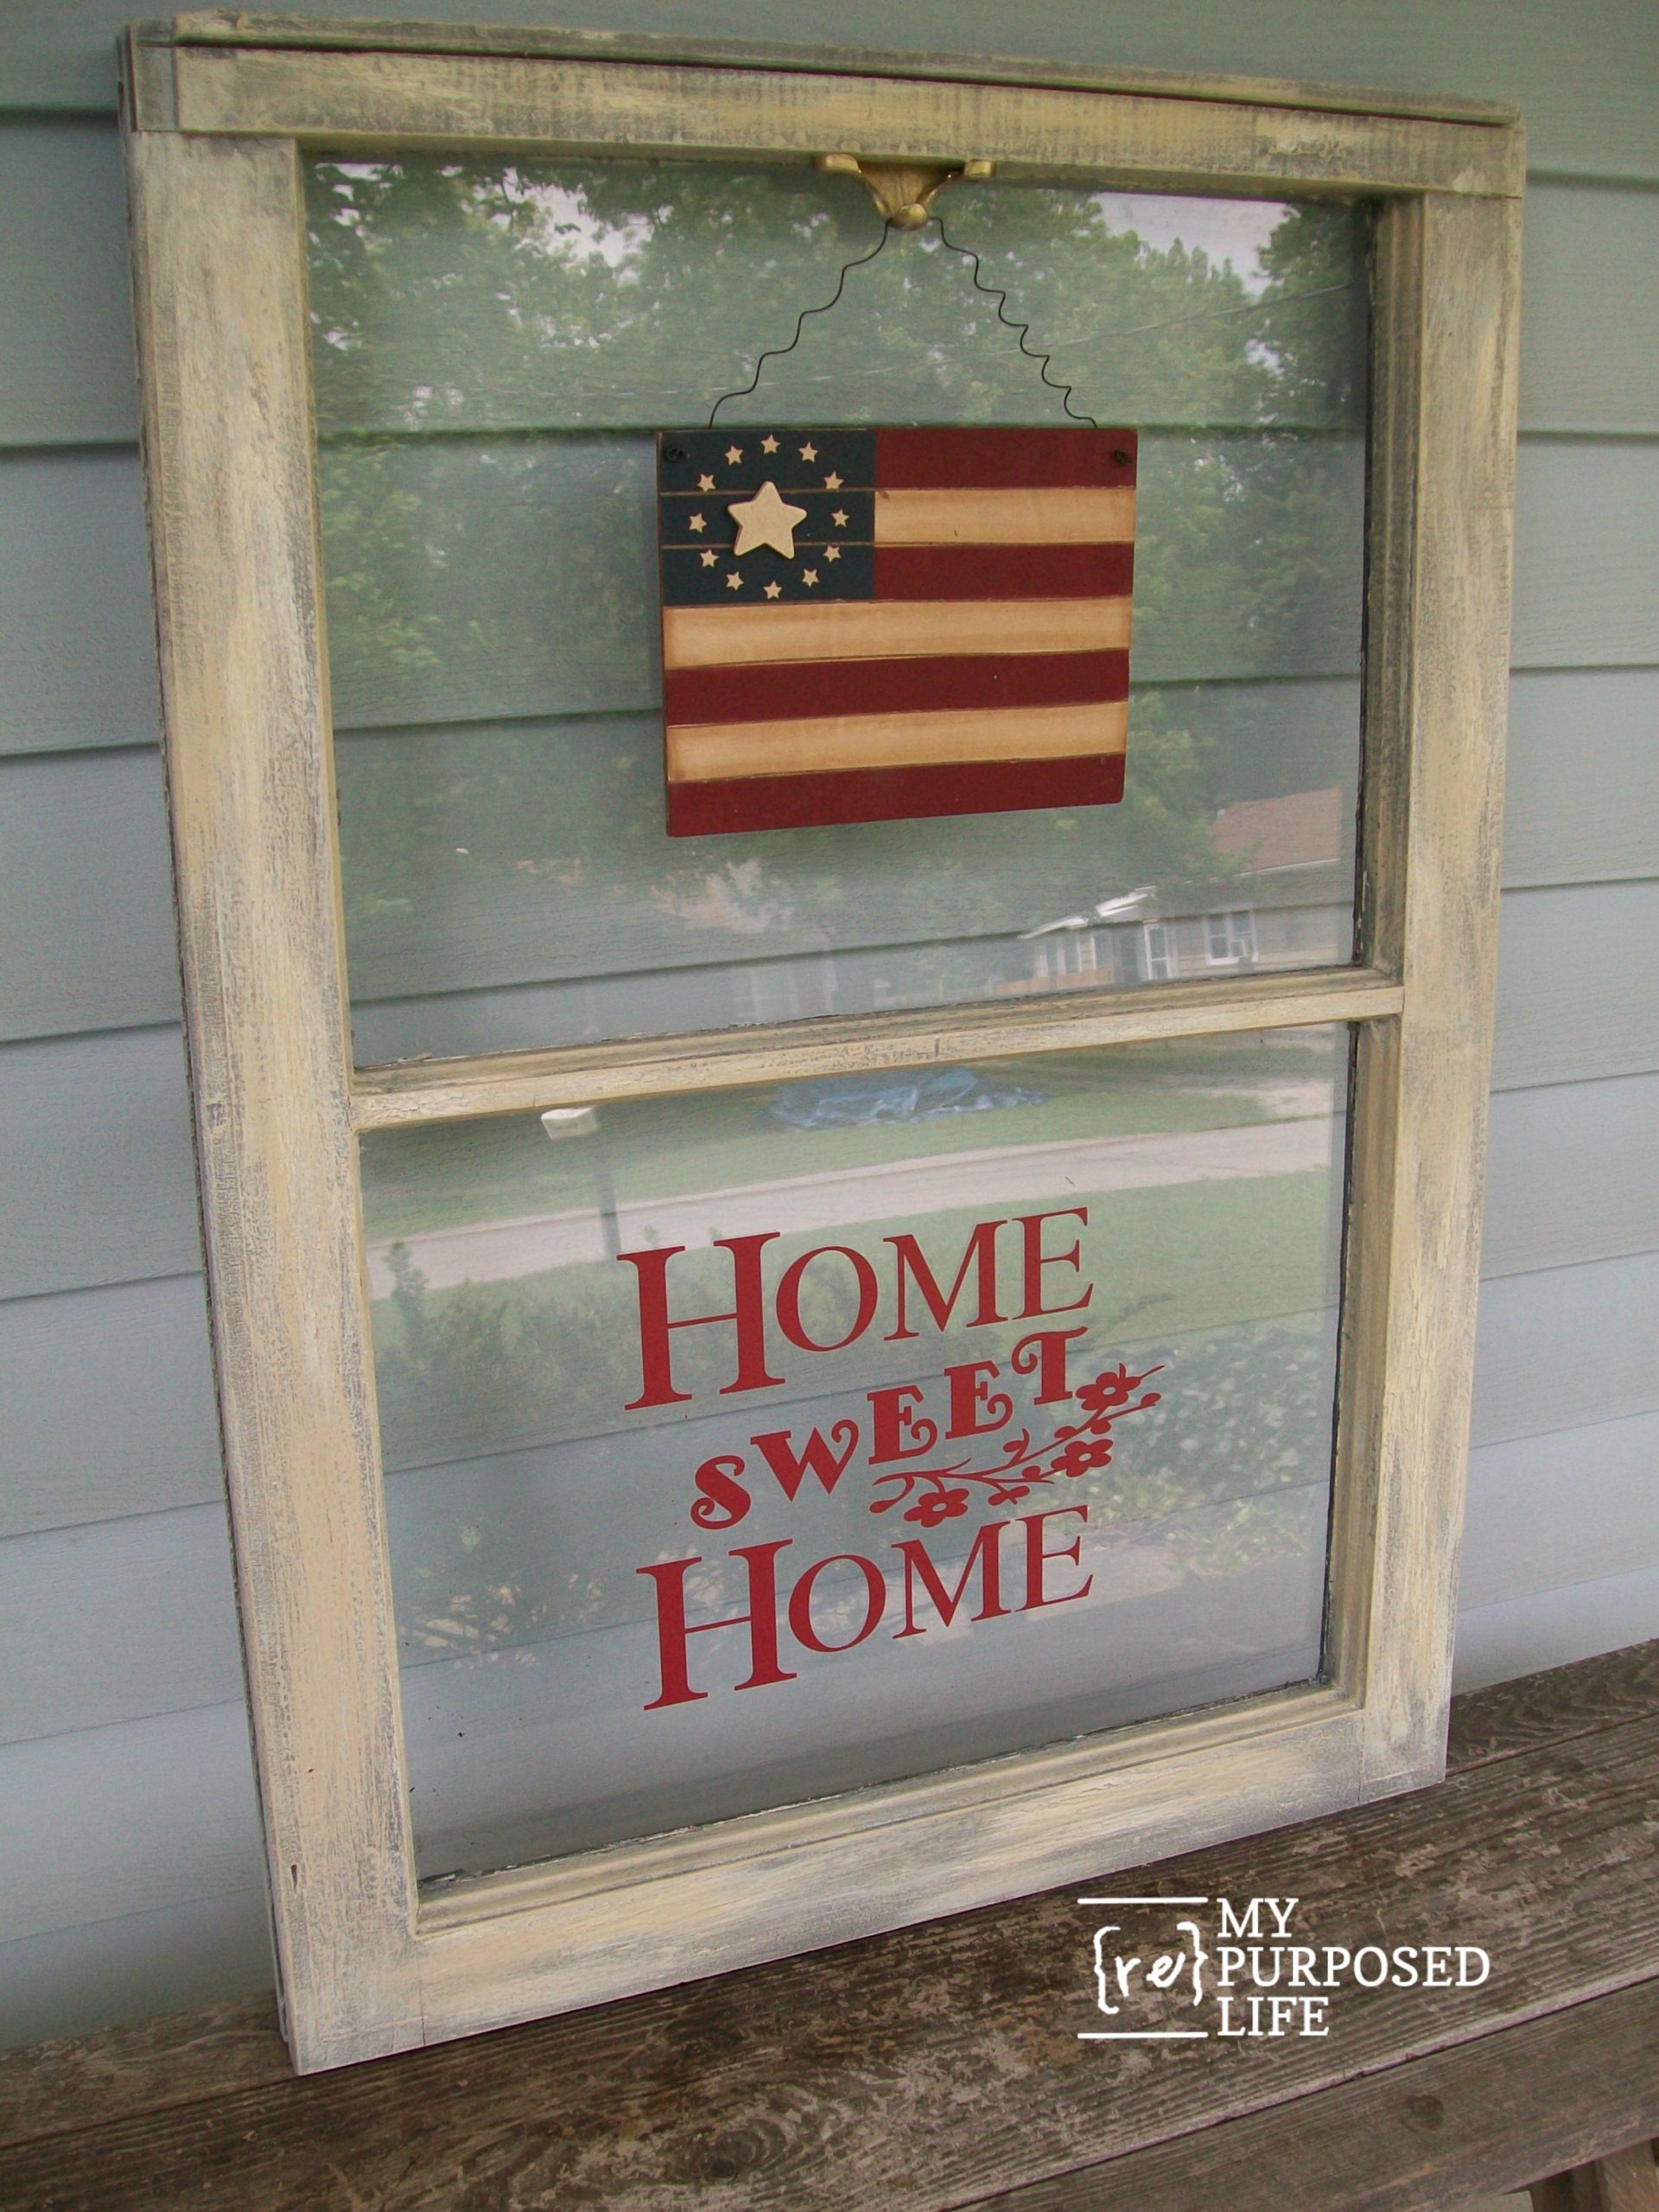 This easy repurposed window project can be done in an afternoon with these easy directions and tips. This is perfect for the 4th of July or Flag Day #MyRepurposedLife #repurposed #reclaimed #window #4thofJuly #flagday via @repurposedlife